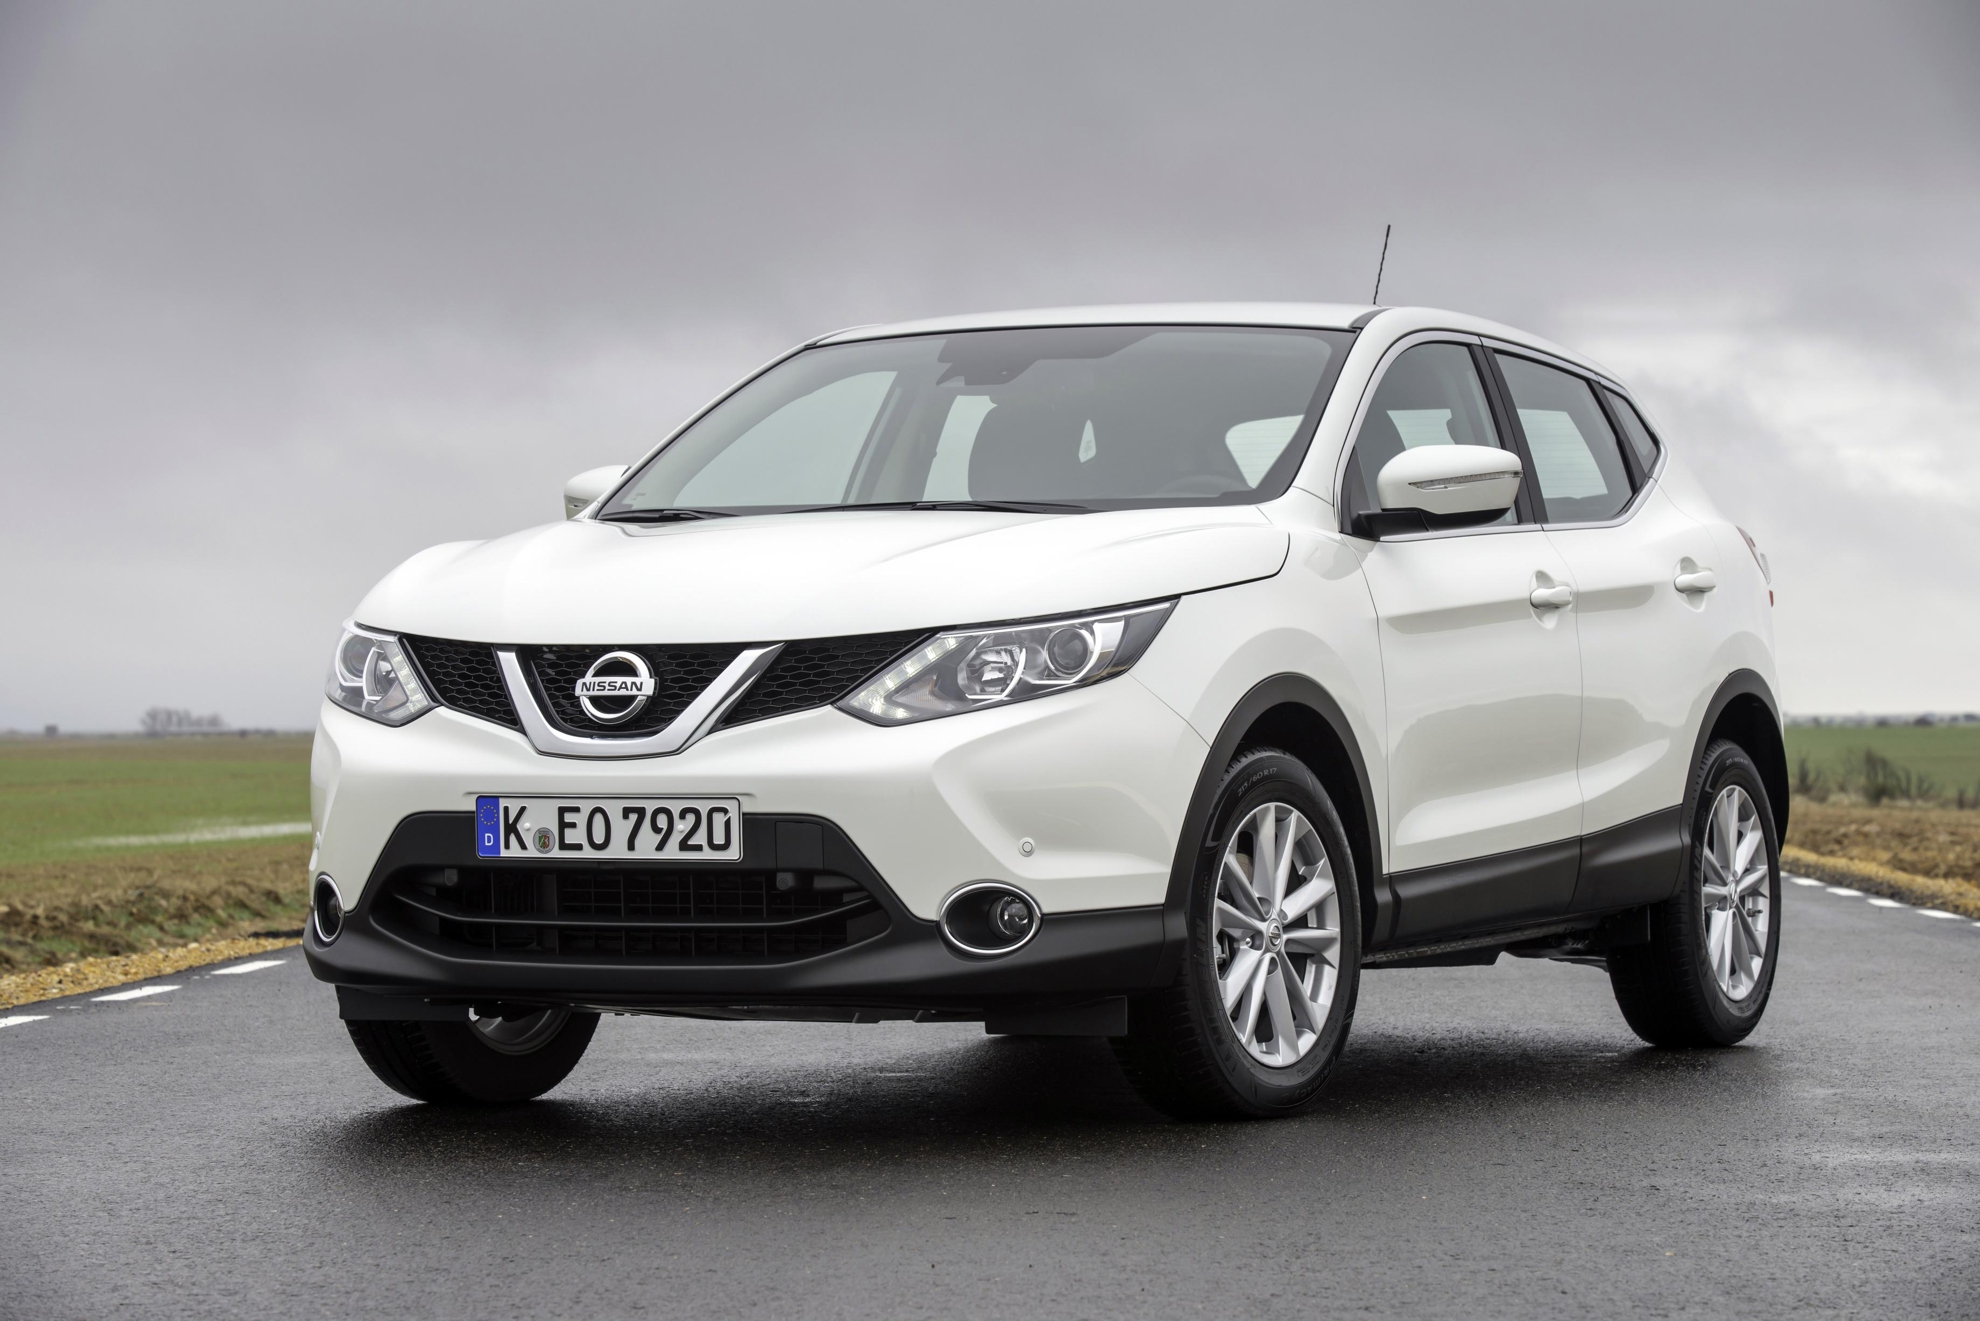 NISSAN QASHQAI IS EURO NCAP’S SAFEST SMALL FAMILY CAR OF 2014